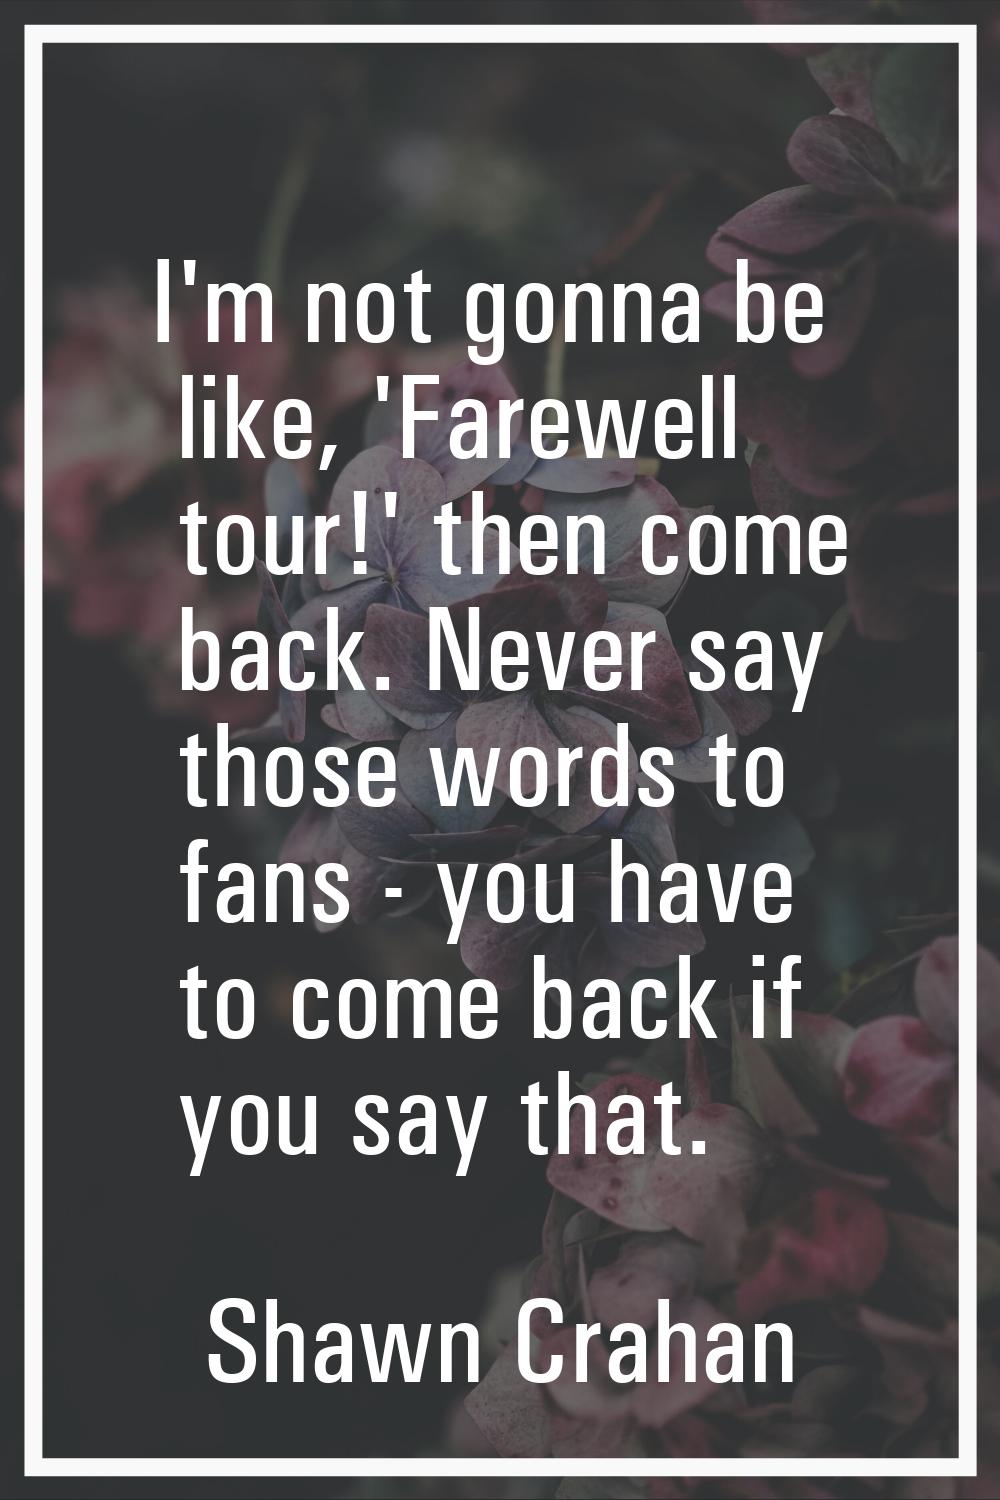 I'm not gonna be like, 'Farewell tour!' then come back. Never say those words to fans - you have to